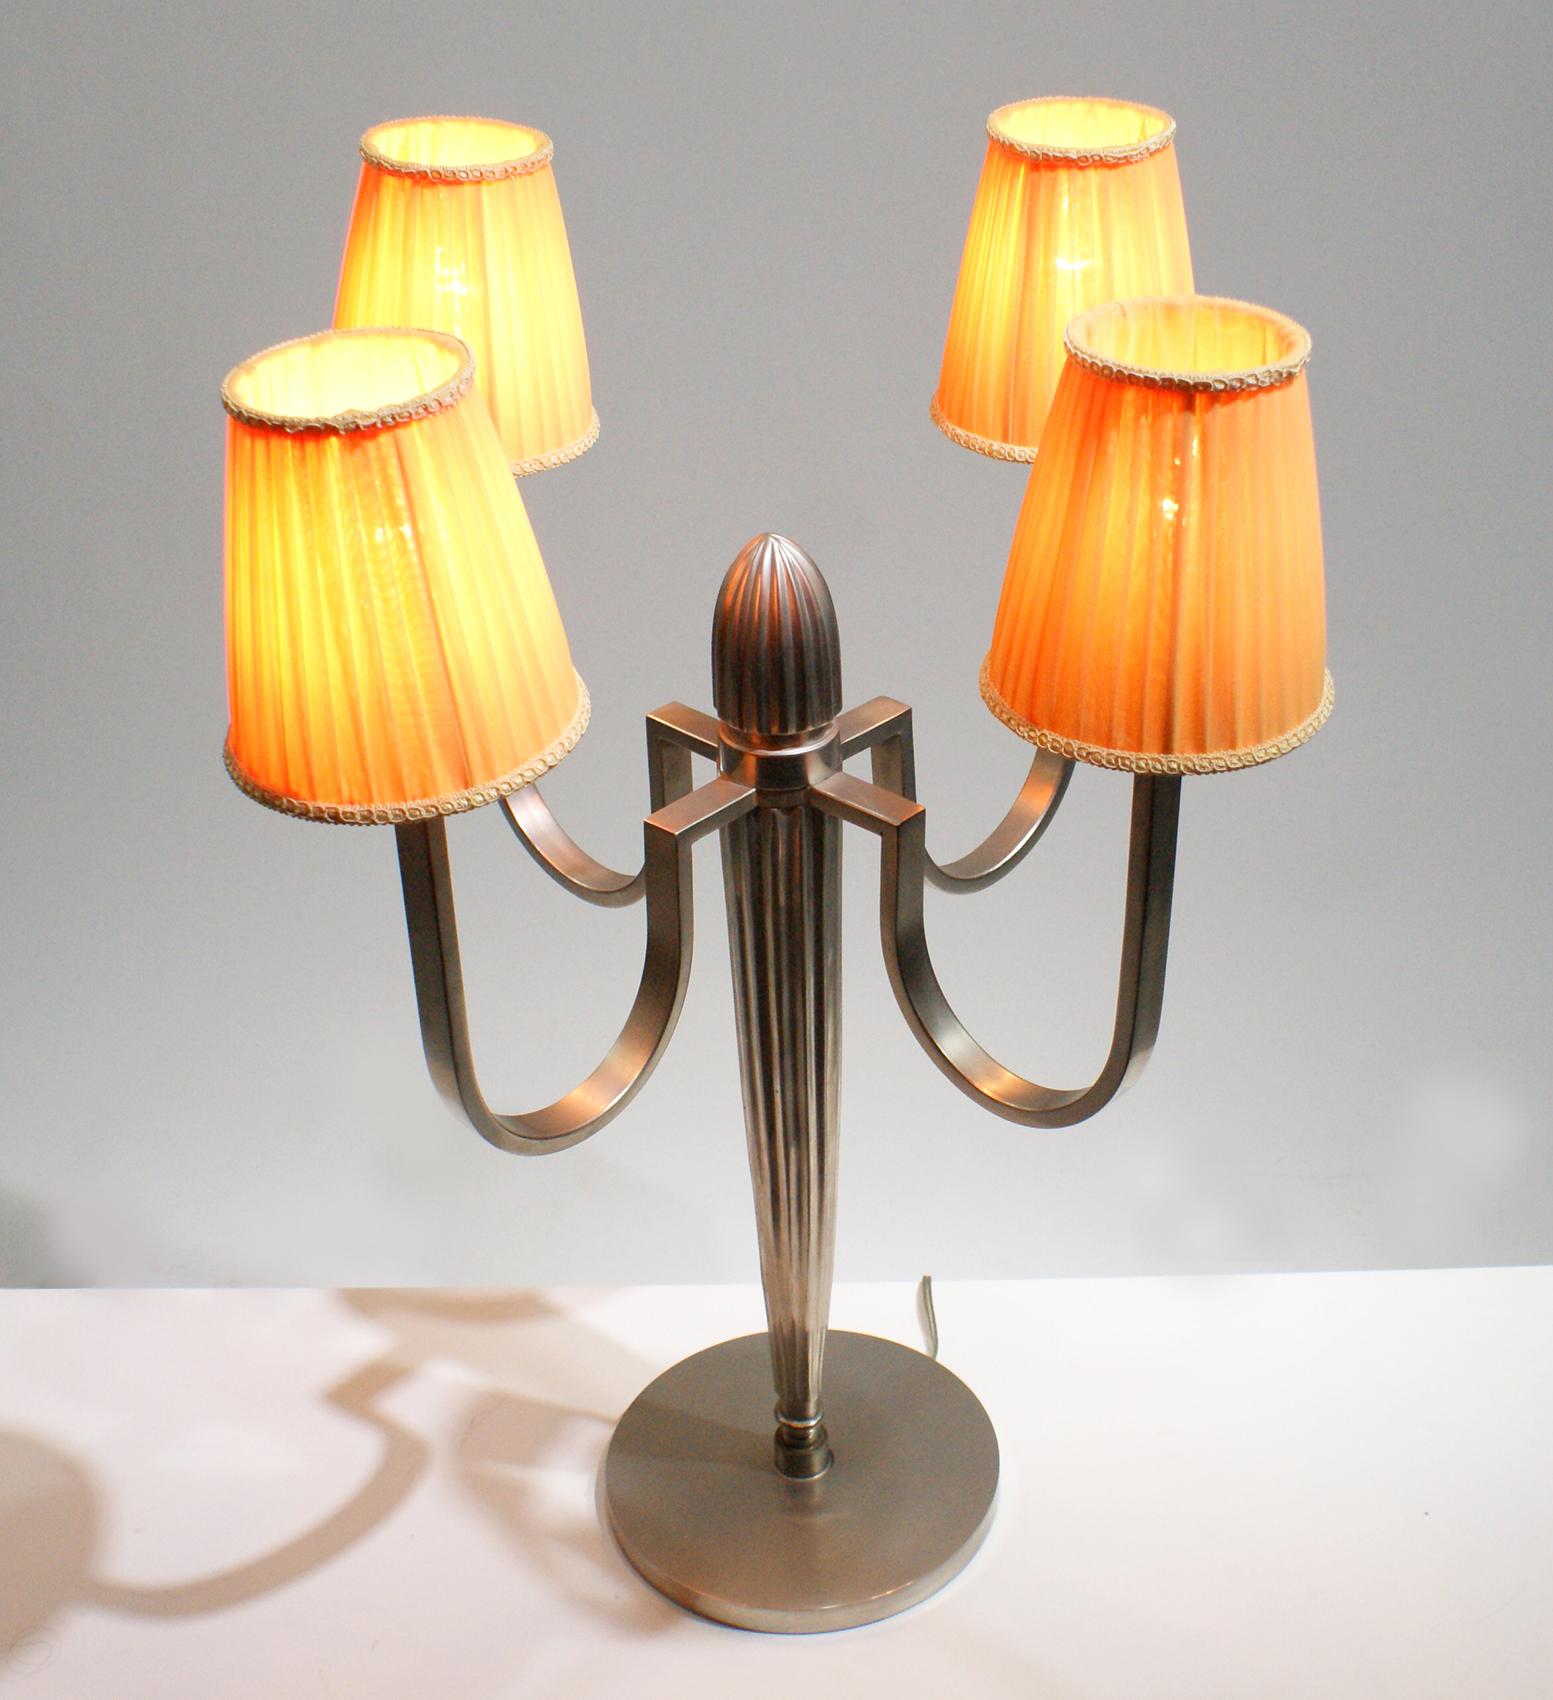 Pair of Art Deco table lamp in the style of the French artist J.E Ruhlmann, having a central column with four curved arms of lights in silvered bronze modernist design, supporting four pleated “bistro” shape lampshades in light orange linen fabric.